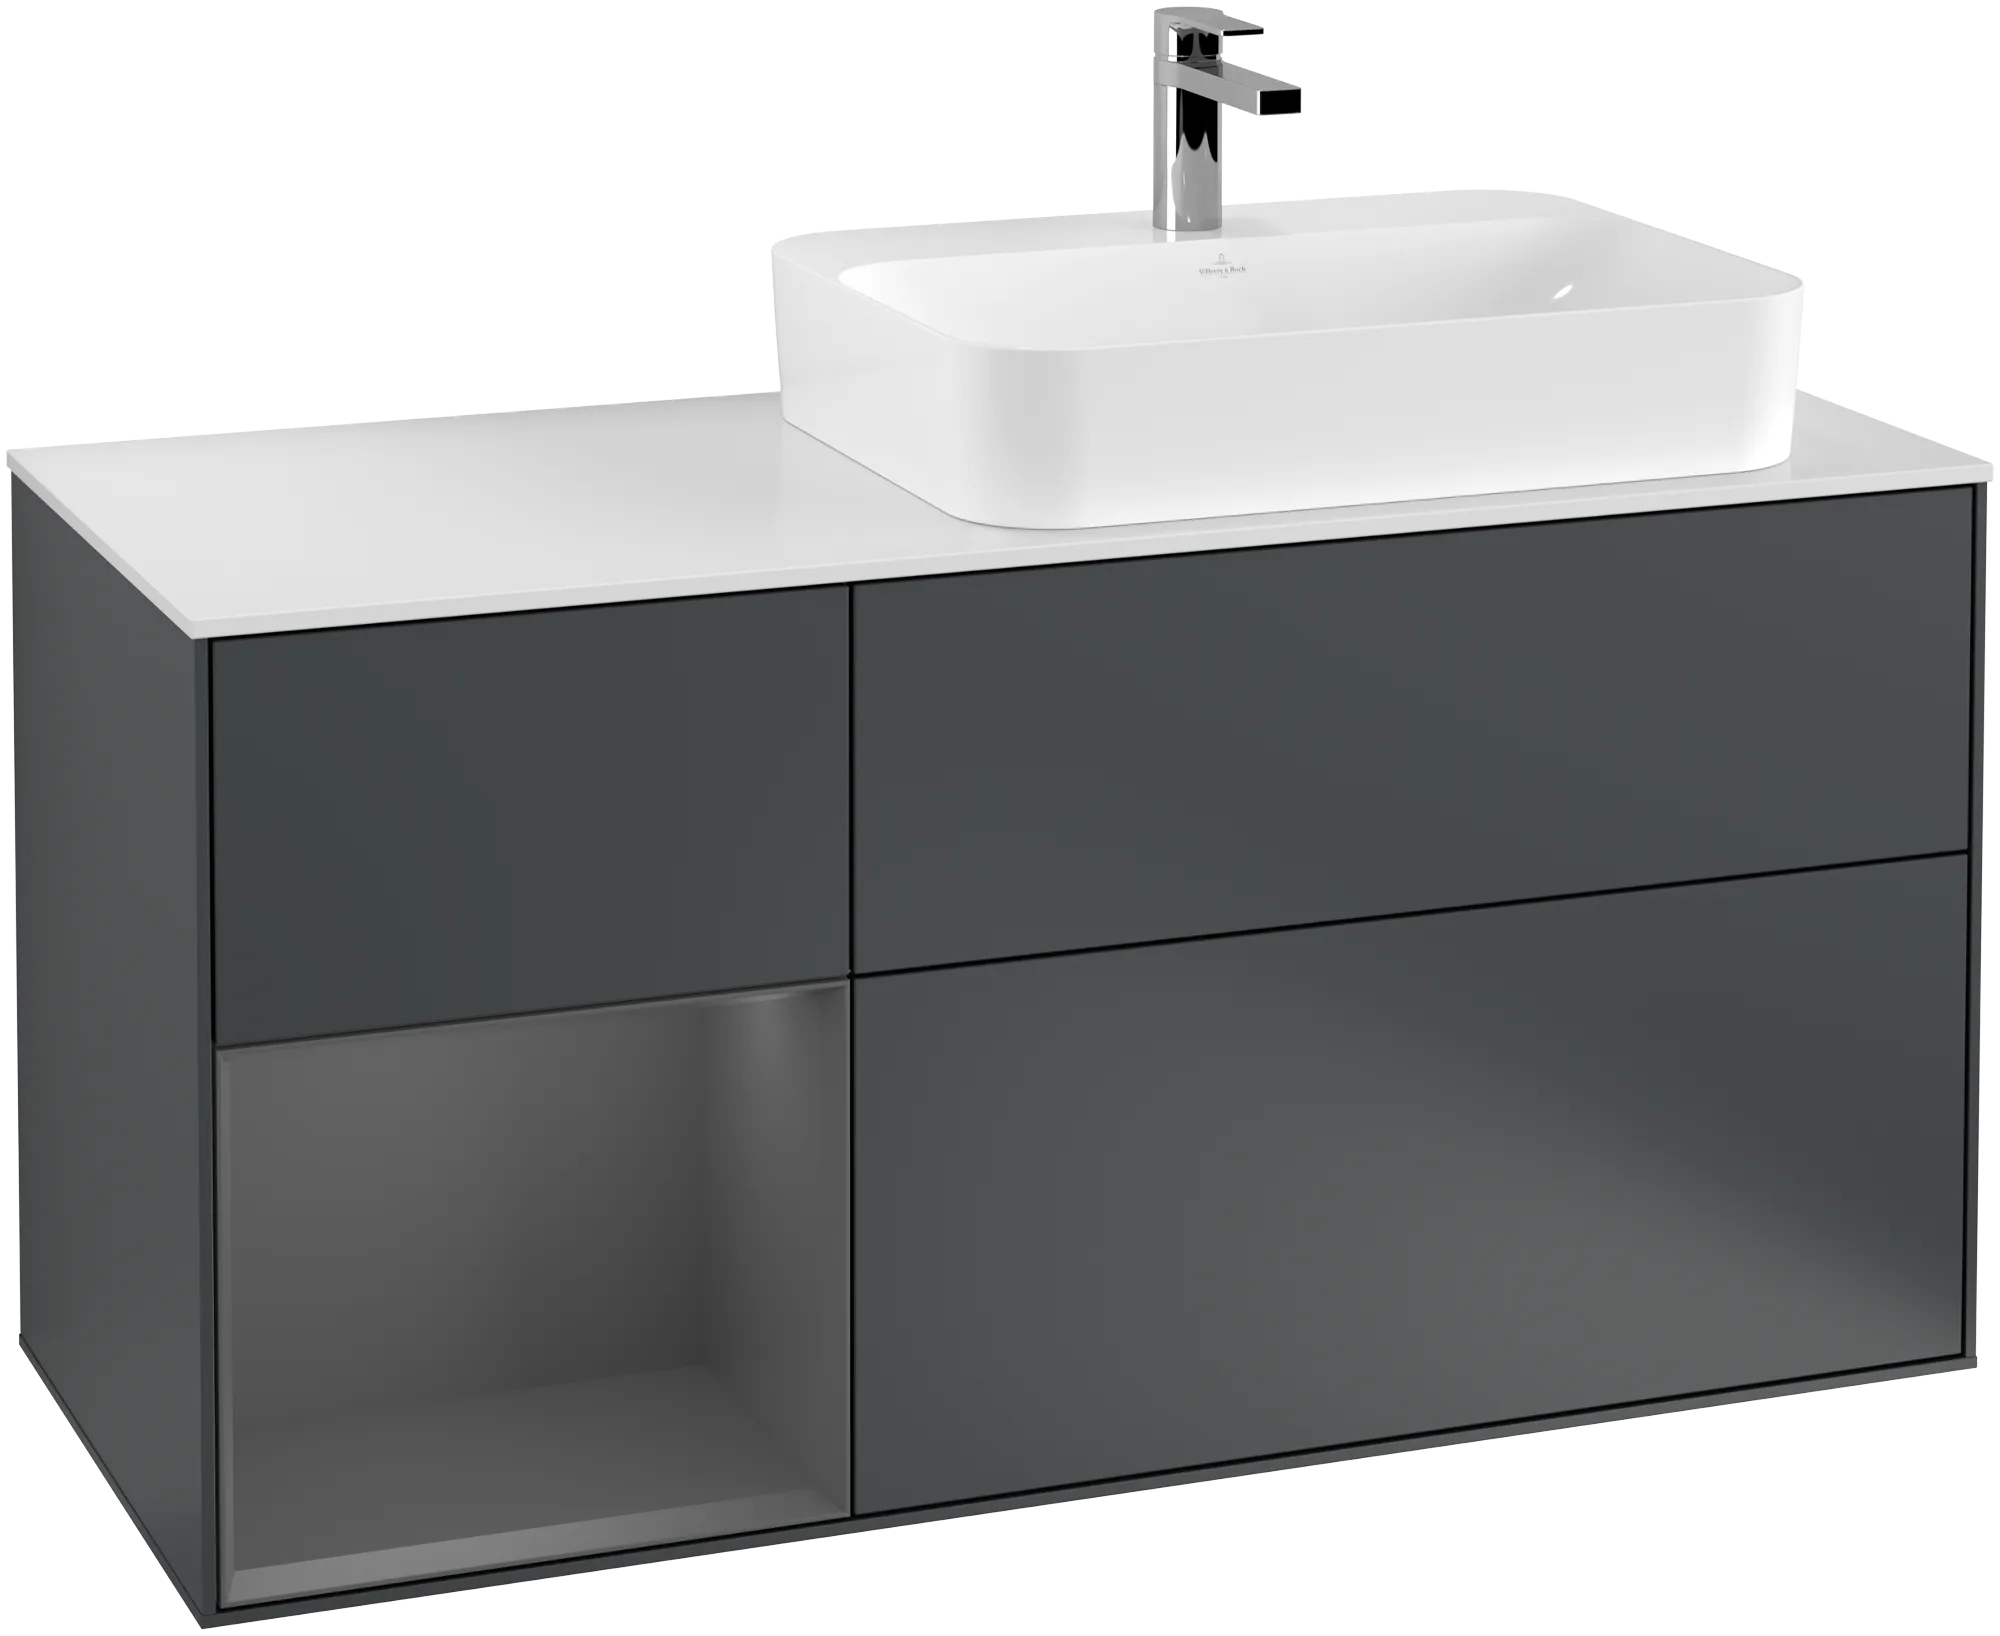 Obrázek VILLEROY BOCH Finion Vanity unit, with lighting, 3 pull-out compartments, 1200 x 603 x 501 mm, Midnight Blue Matt Lacquer / Anthracite Matt Lacquer / Glass White Matt #G391GKHG